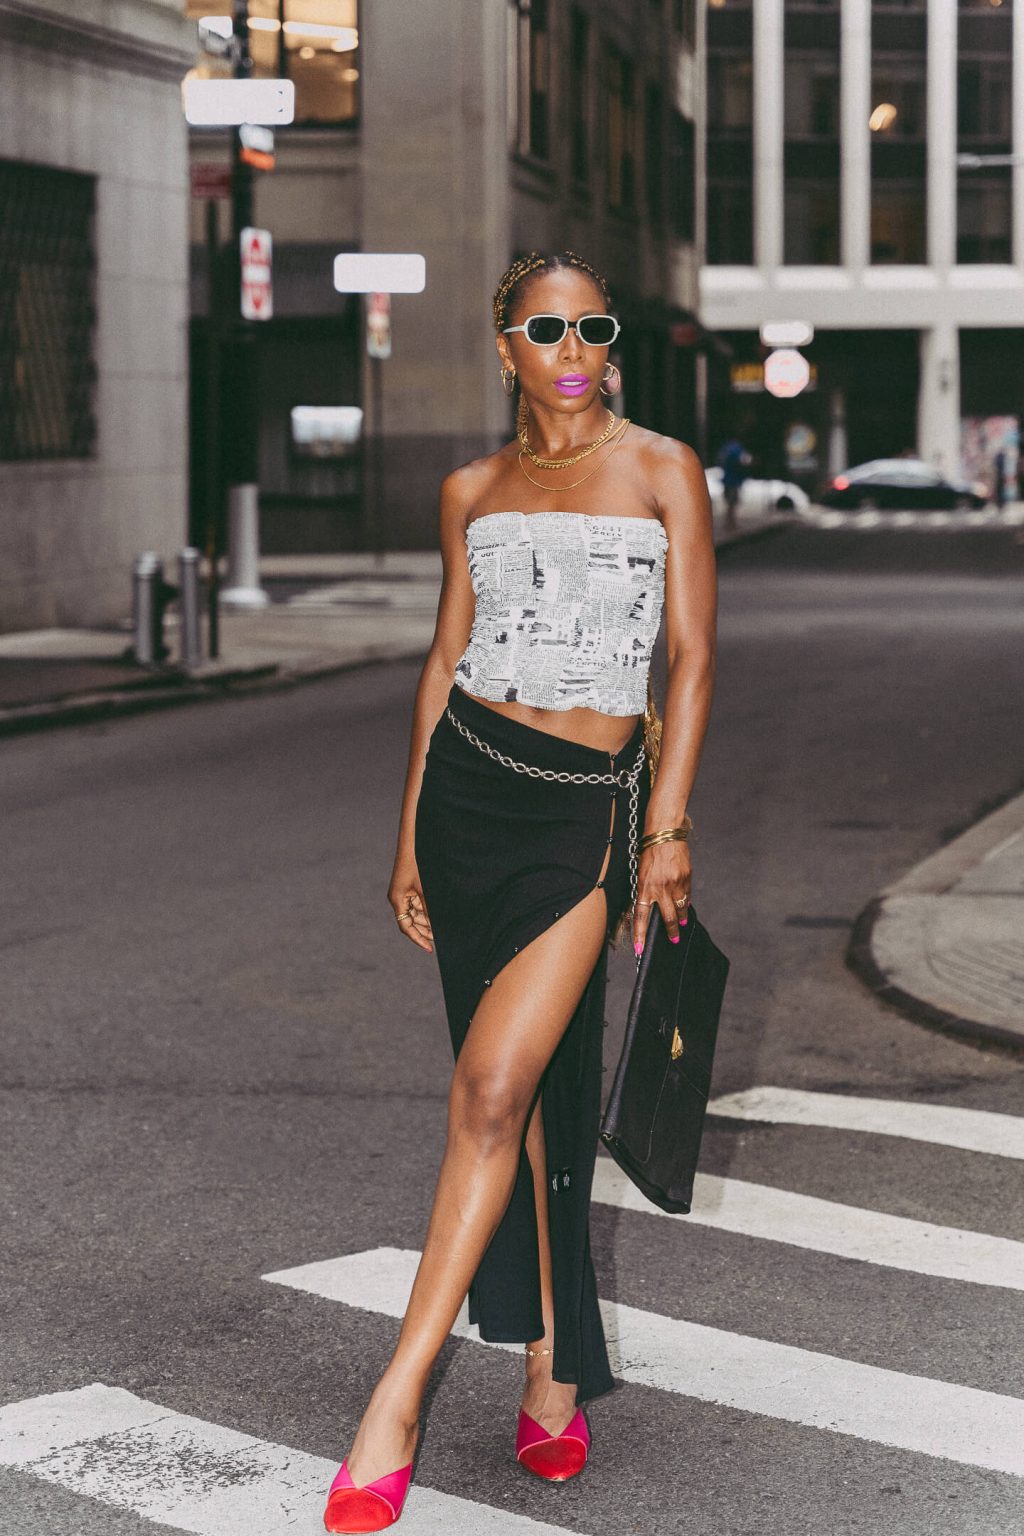 Photos + Links: Styling a Chic Slit Skirt Date Night Outfit